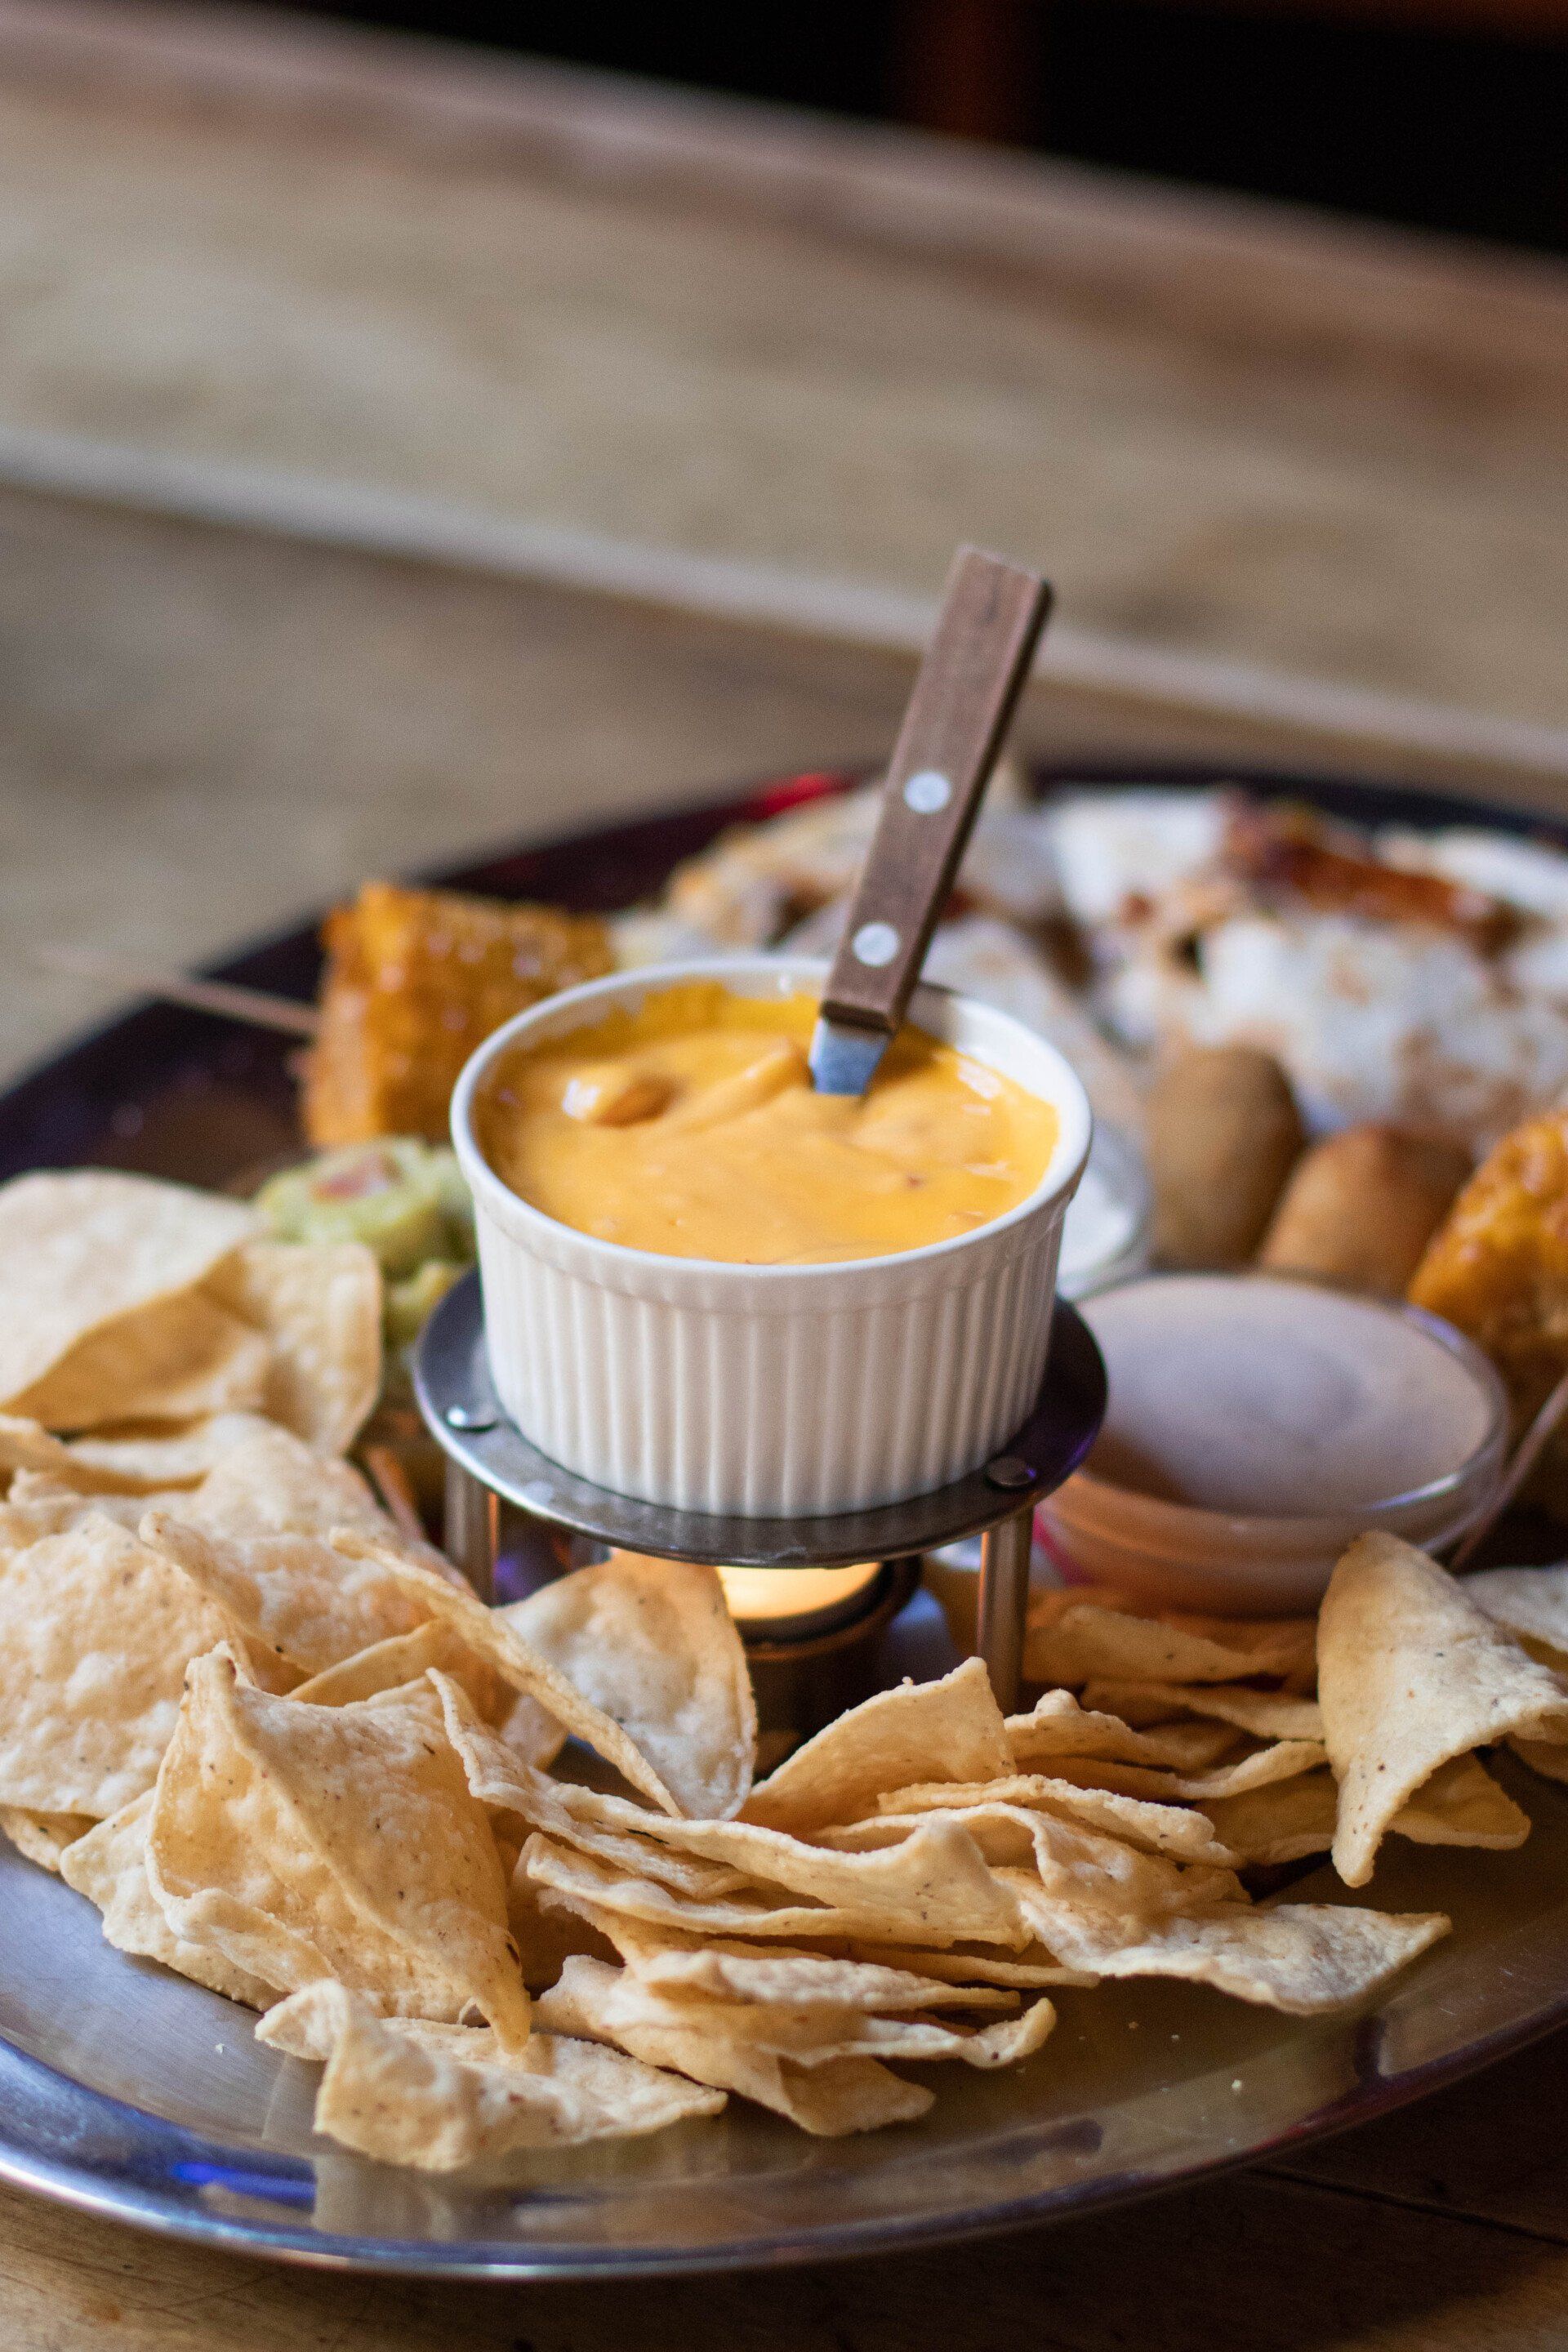 Your guests will enjoy these beer dips anytime of the year, not just for football parties.